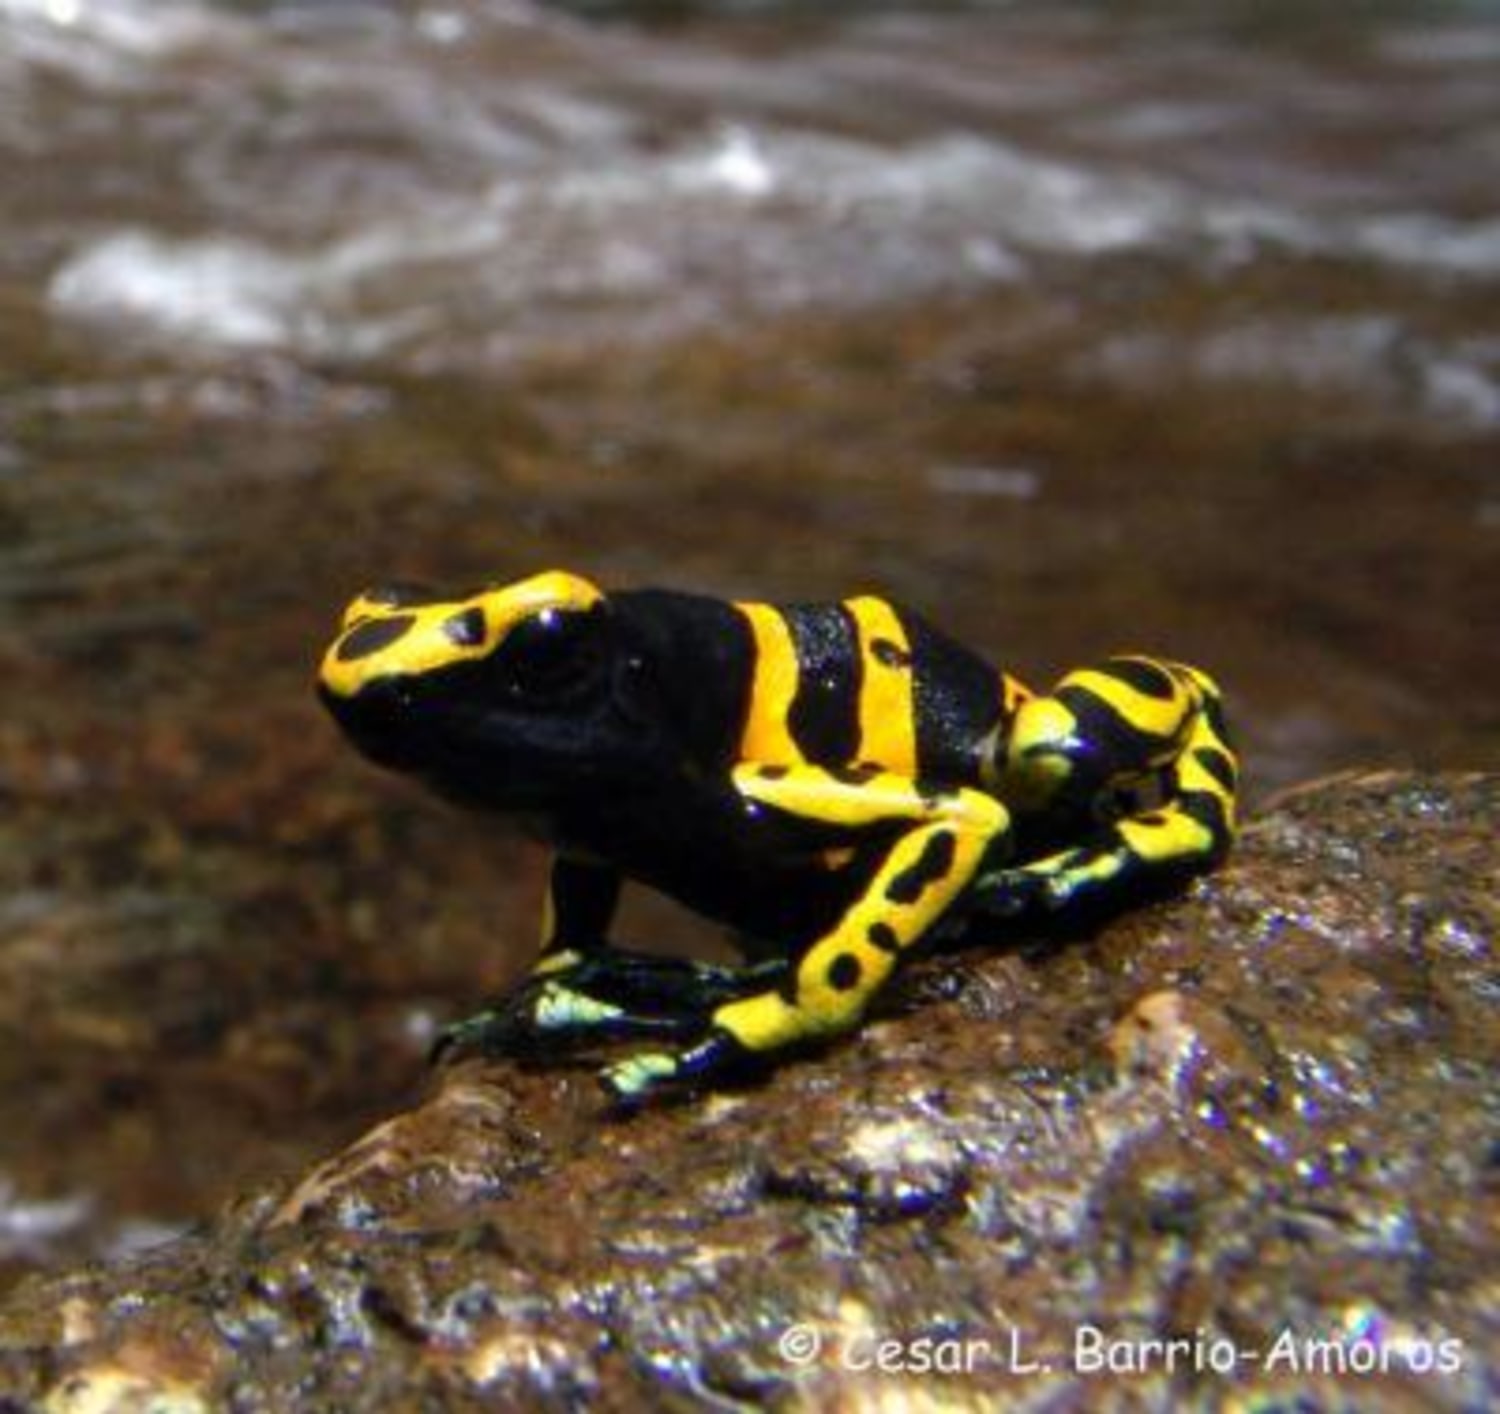 Poison dart frogs leap to the top for frog fitness